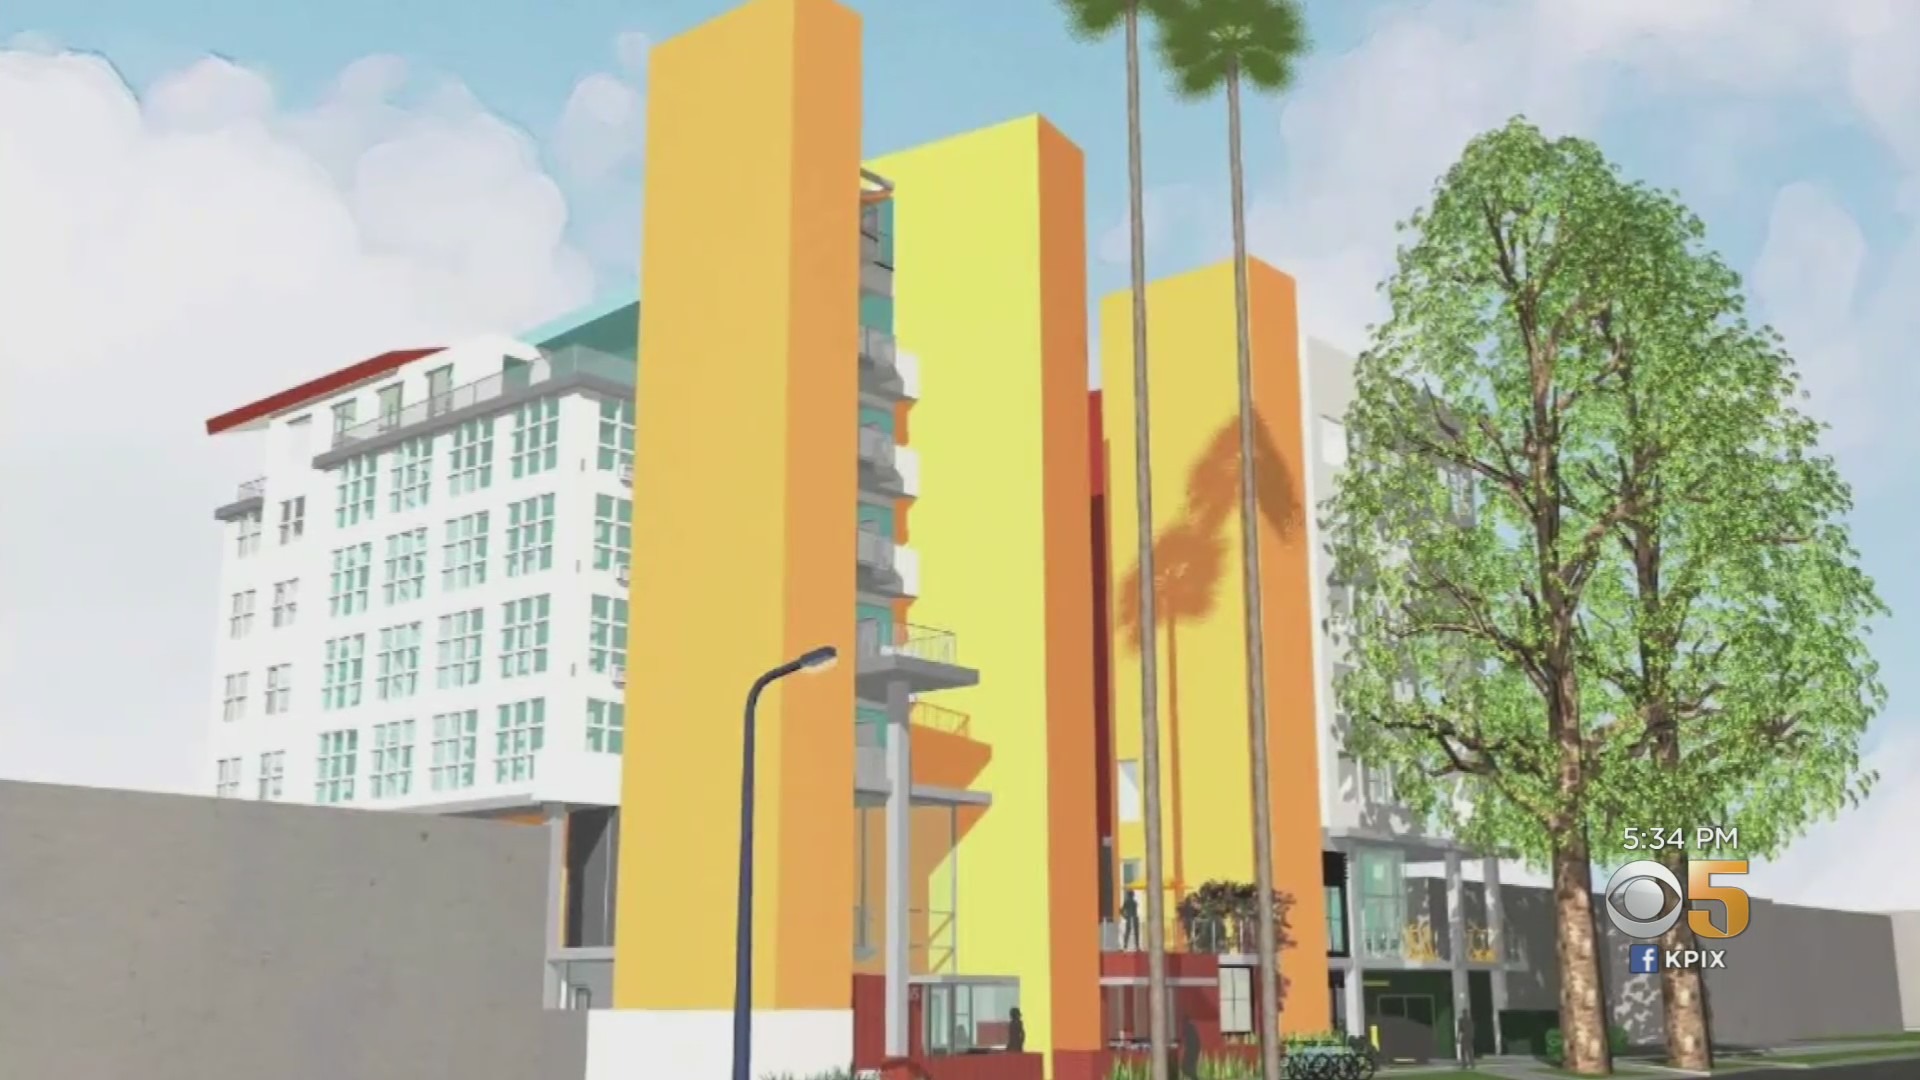 Artist's rendering of an affordable housing development in San Jose funded by Facebook's $150 million initiative. (CBS)